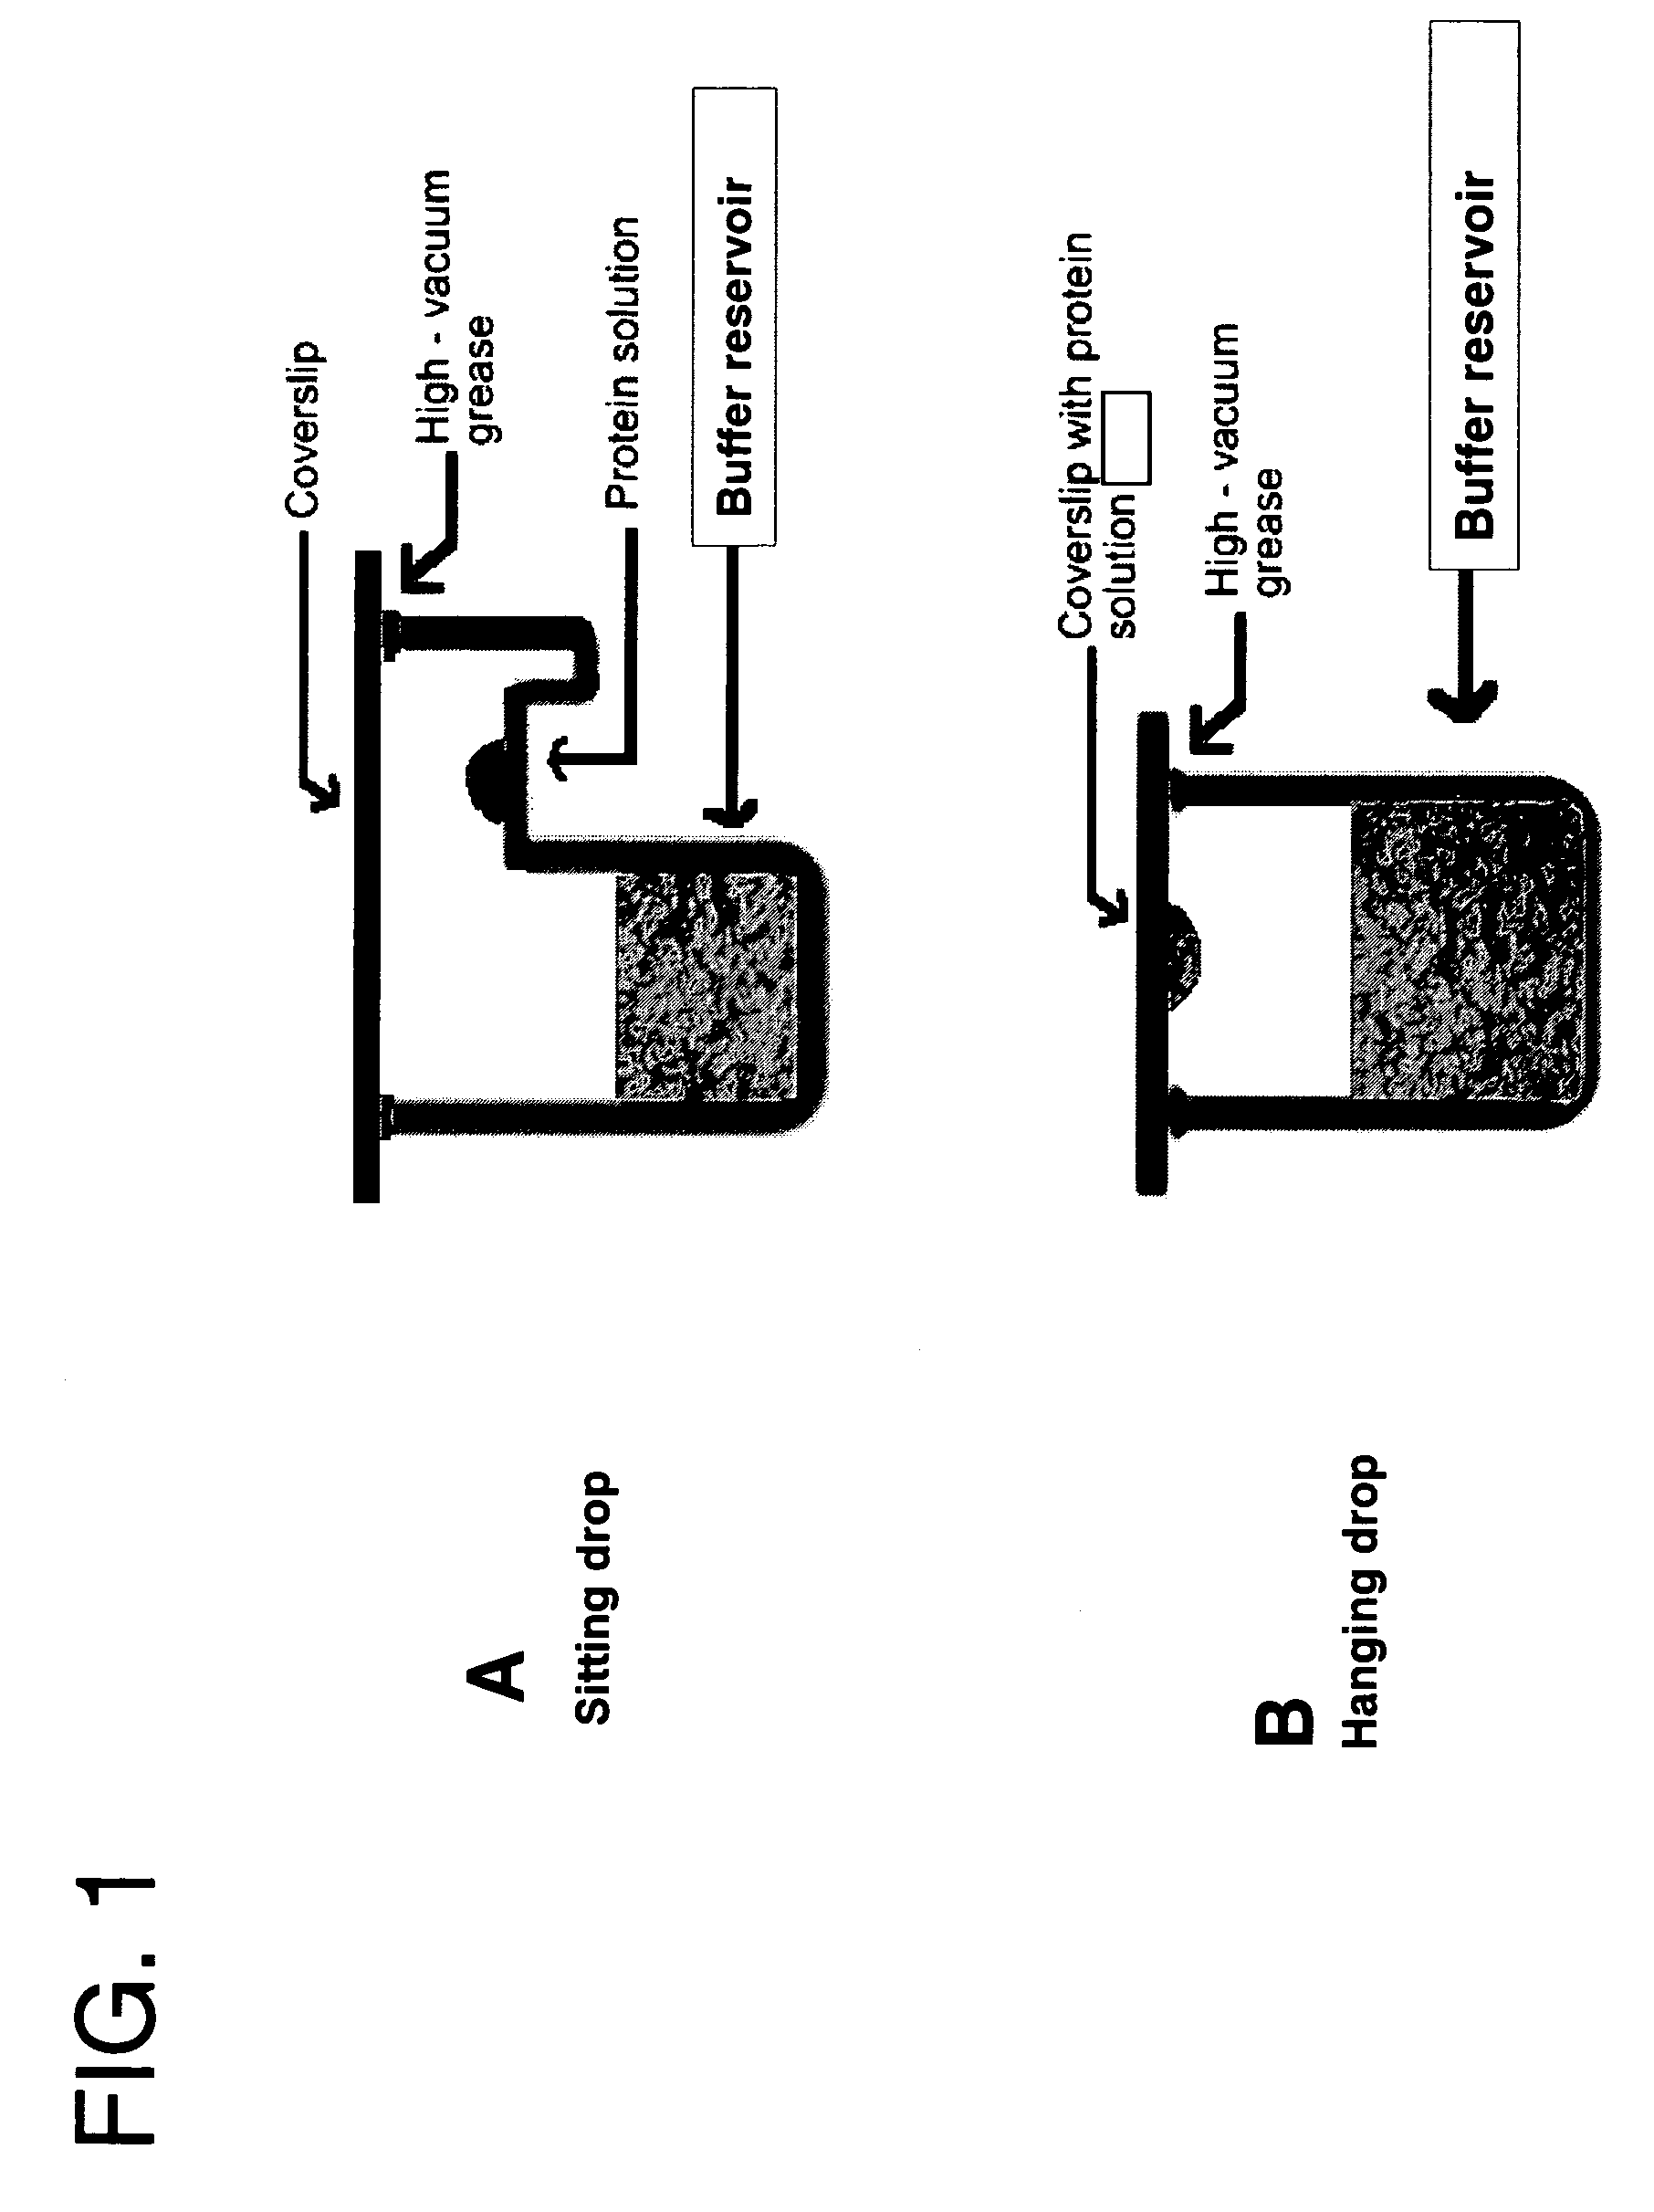 High-throughput method for optimum solubility screening for homogeneity and crystallization of proteins